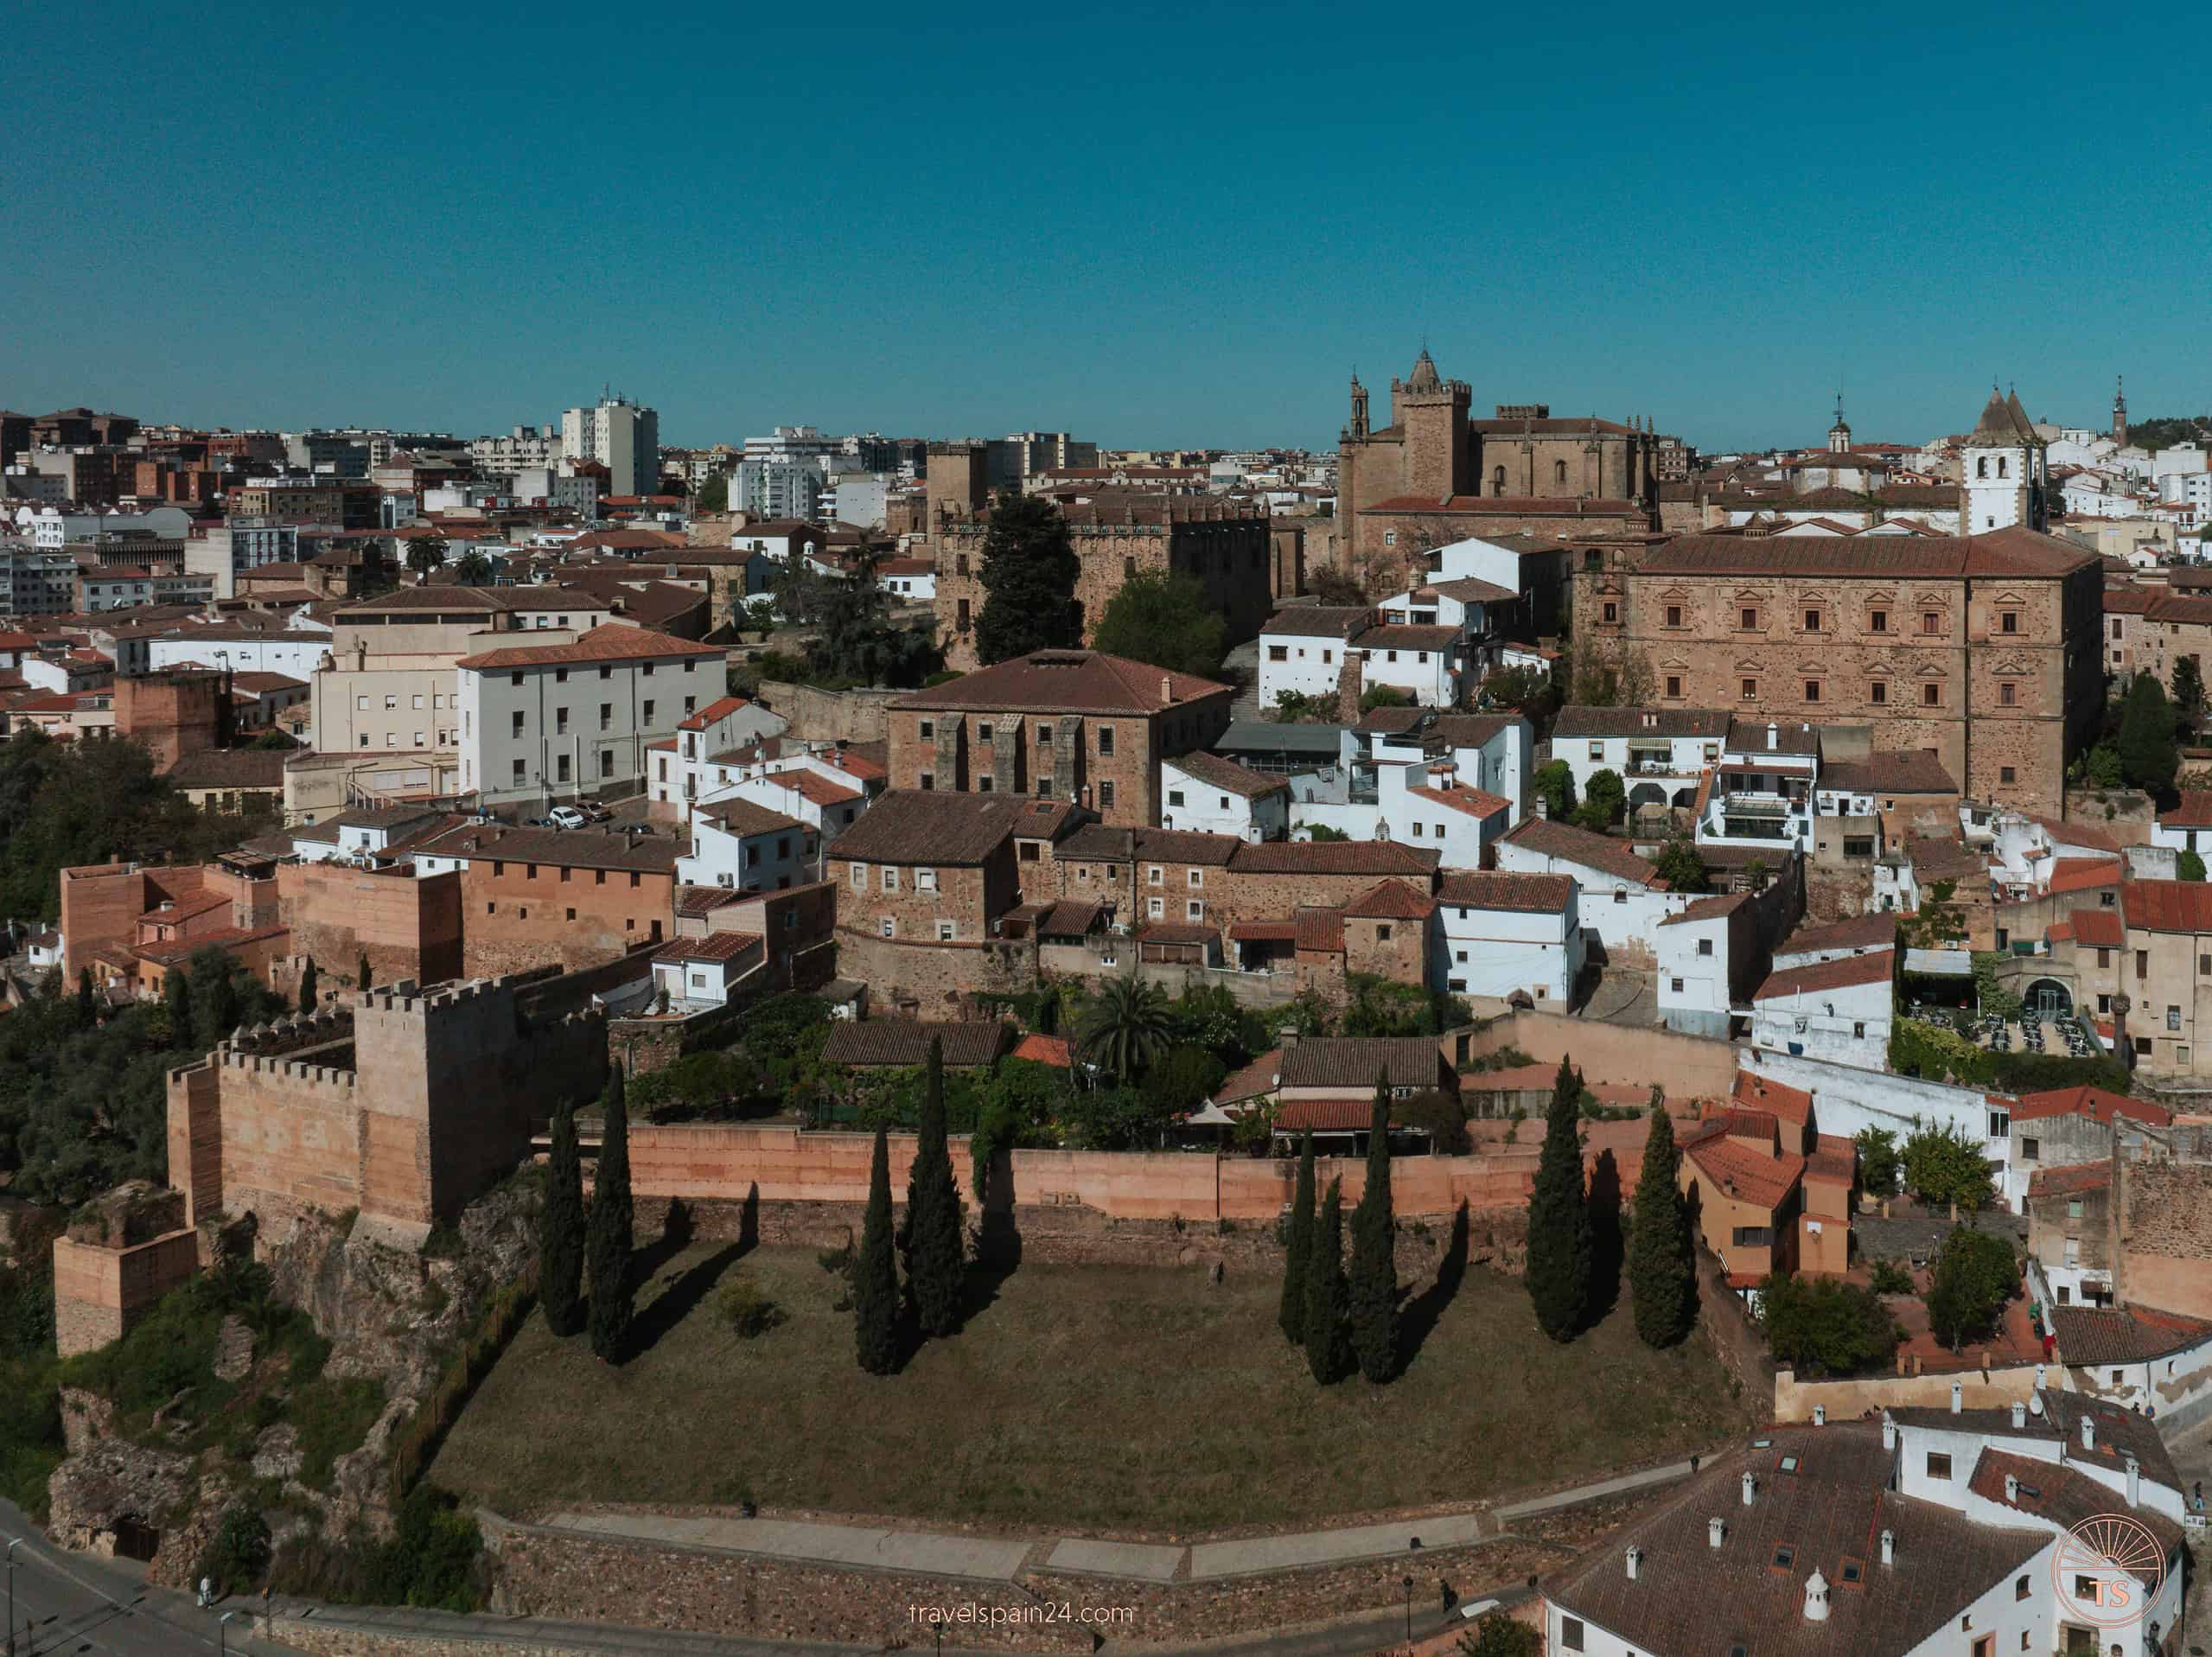 Expansive panoramic view of Cáceres from Mirador El Banco Mas Bonito, showcasing the city’s stunning architecture and verdant surroundings.